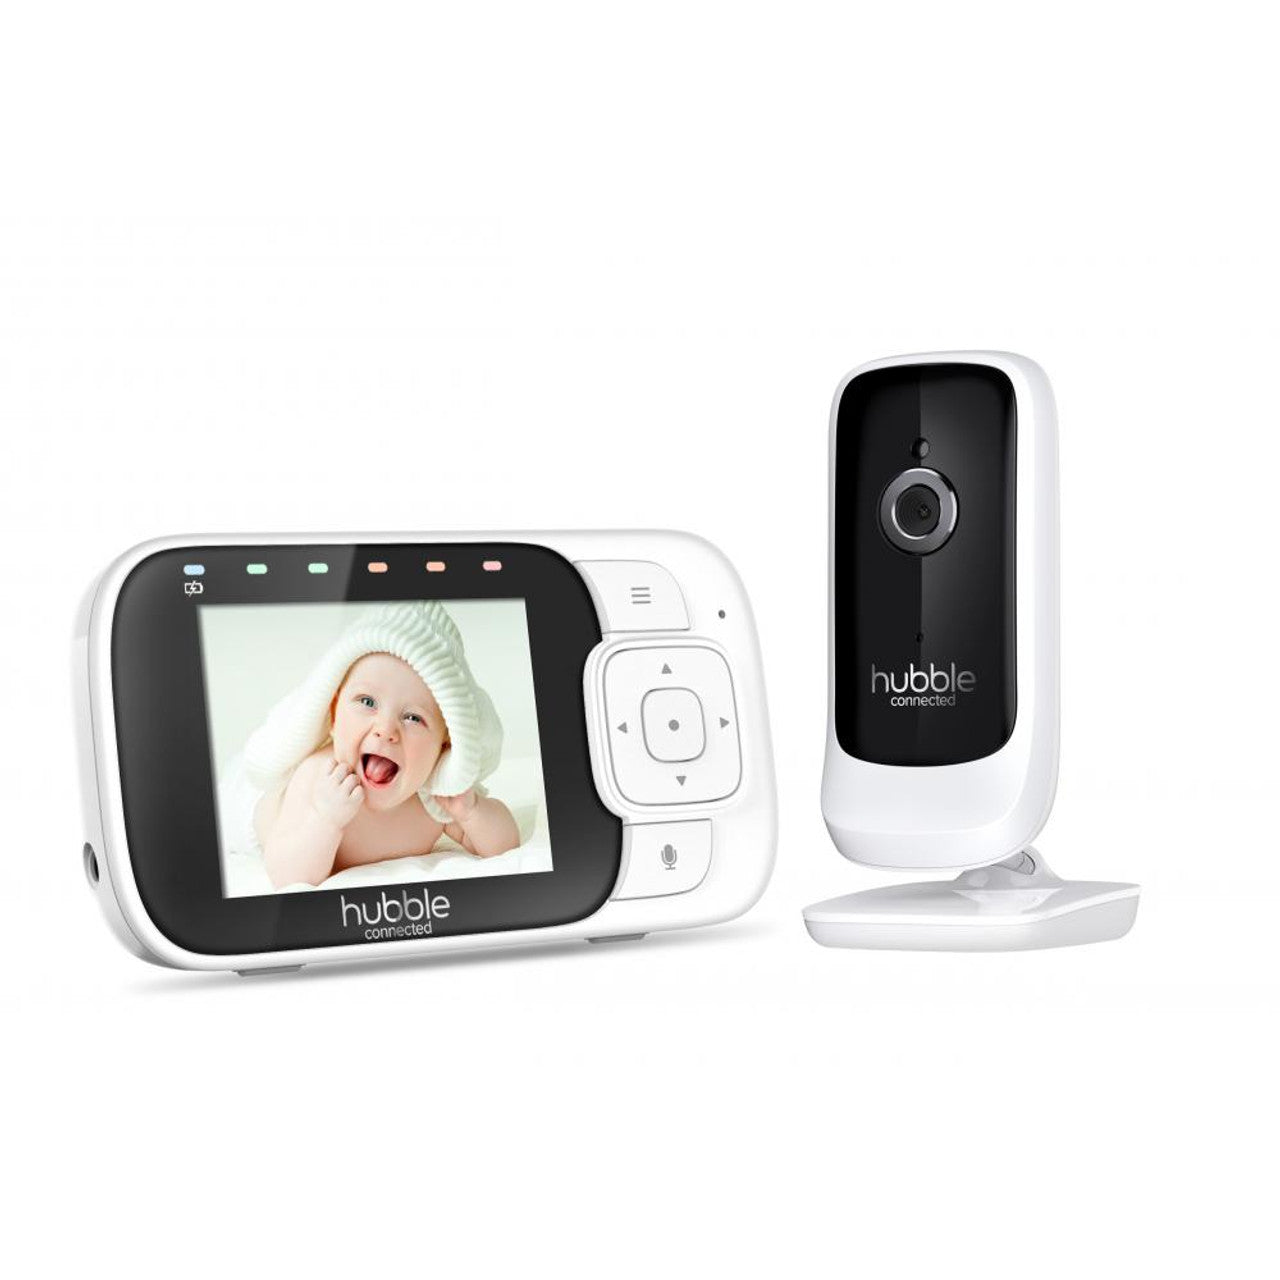 Hubble Nursery View Partner 2.8" Video Baby Monitor - White & Black | 5012786049130 from Hubble - DID Electrical